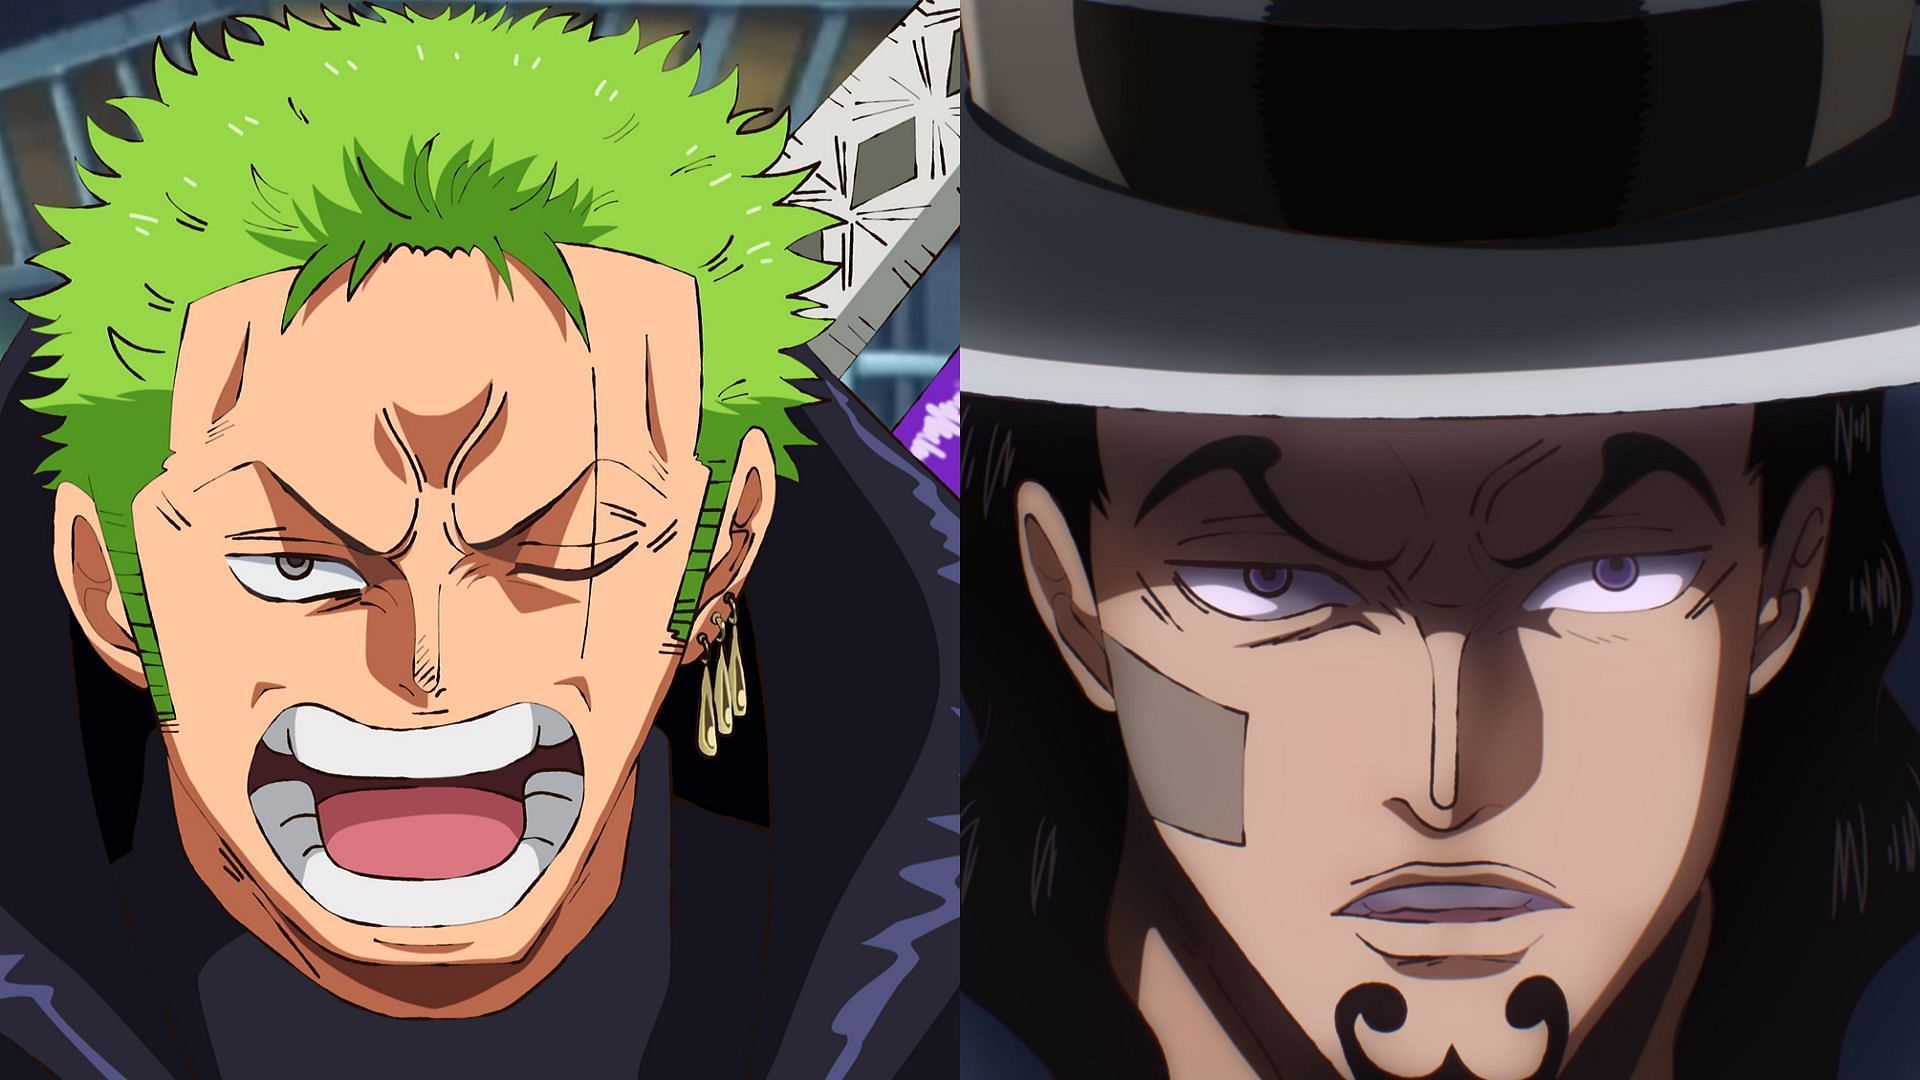 Zoro vs Lucci is going to be one of the coolest fights in Egghead (Image via Eiichiro Oda/Shueisha, One Piece)